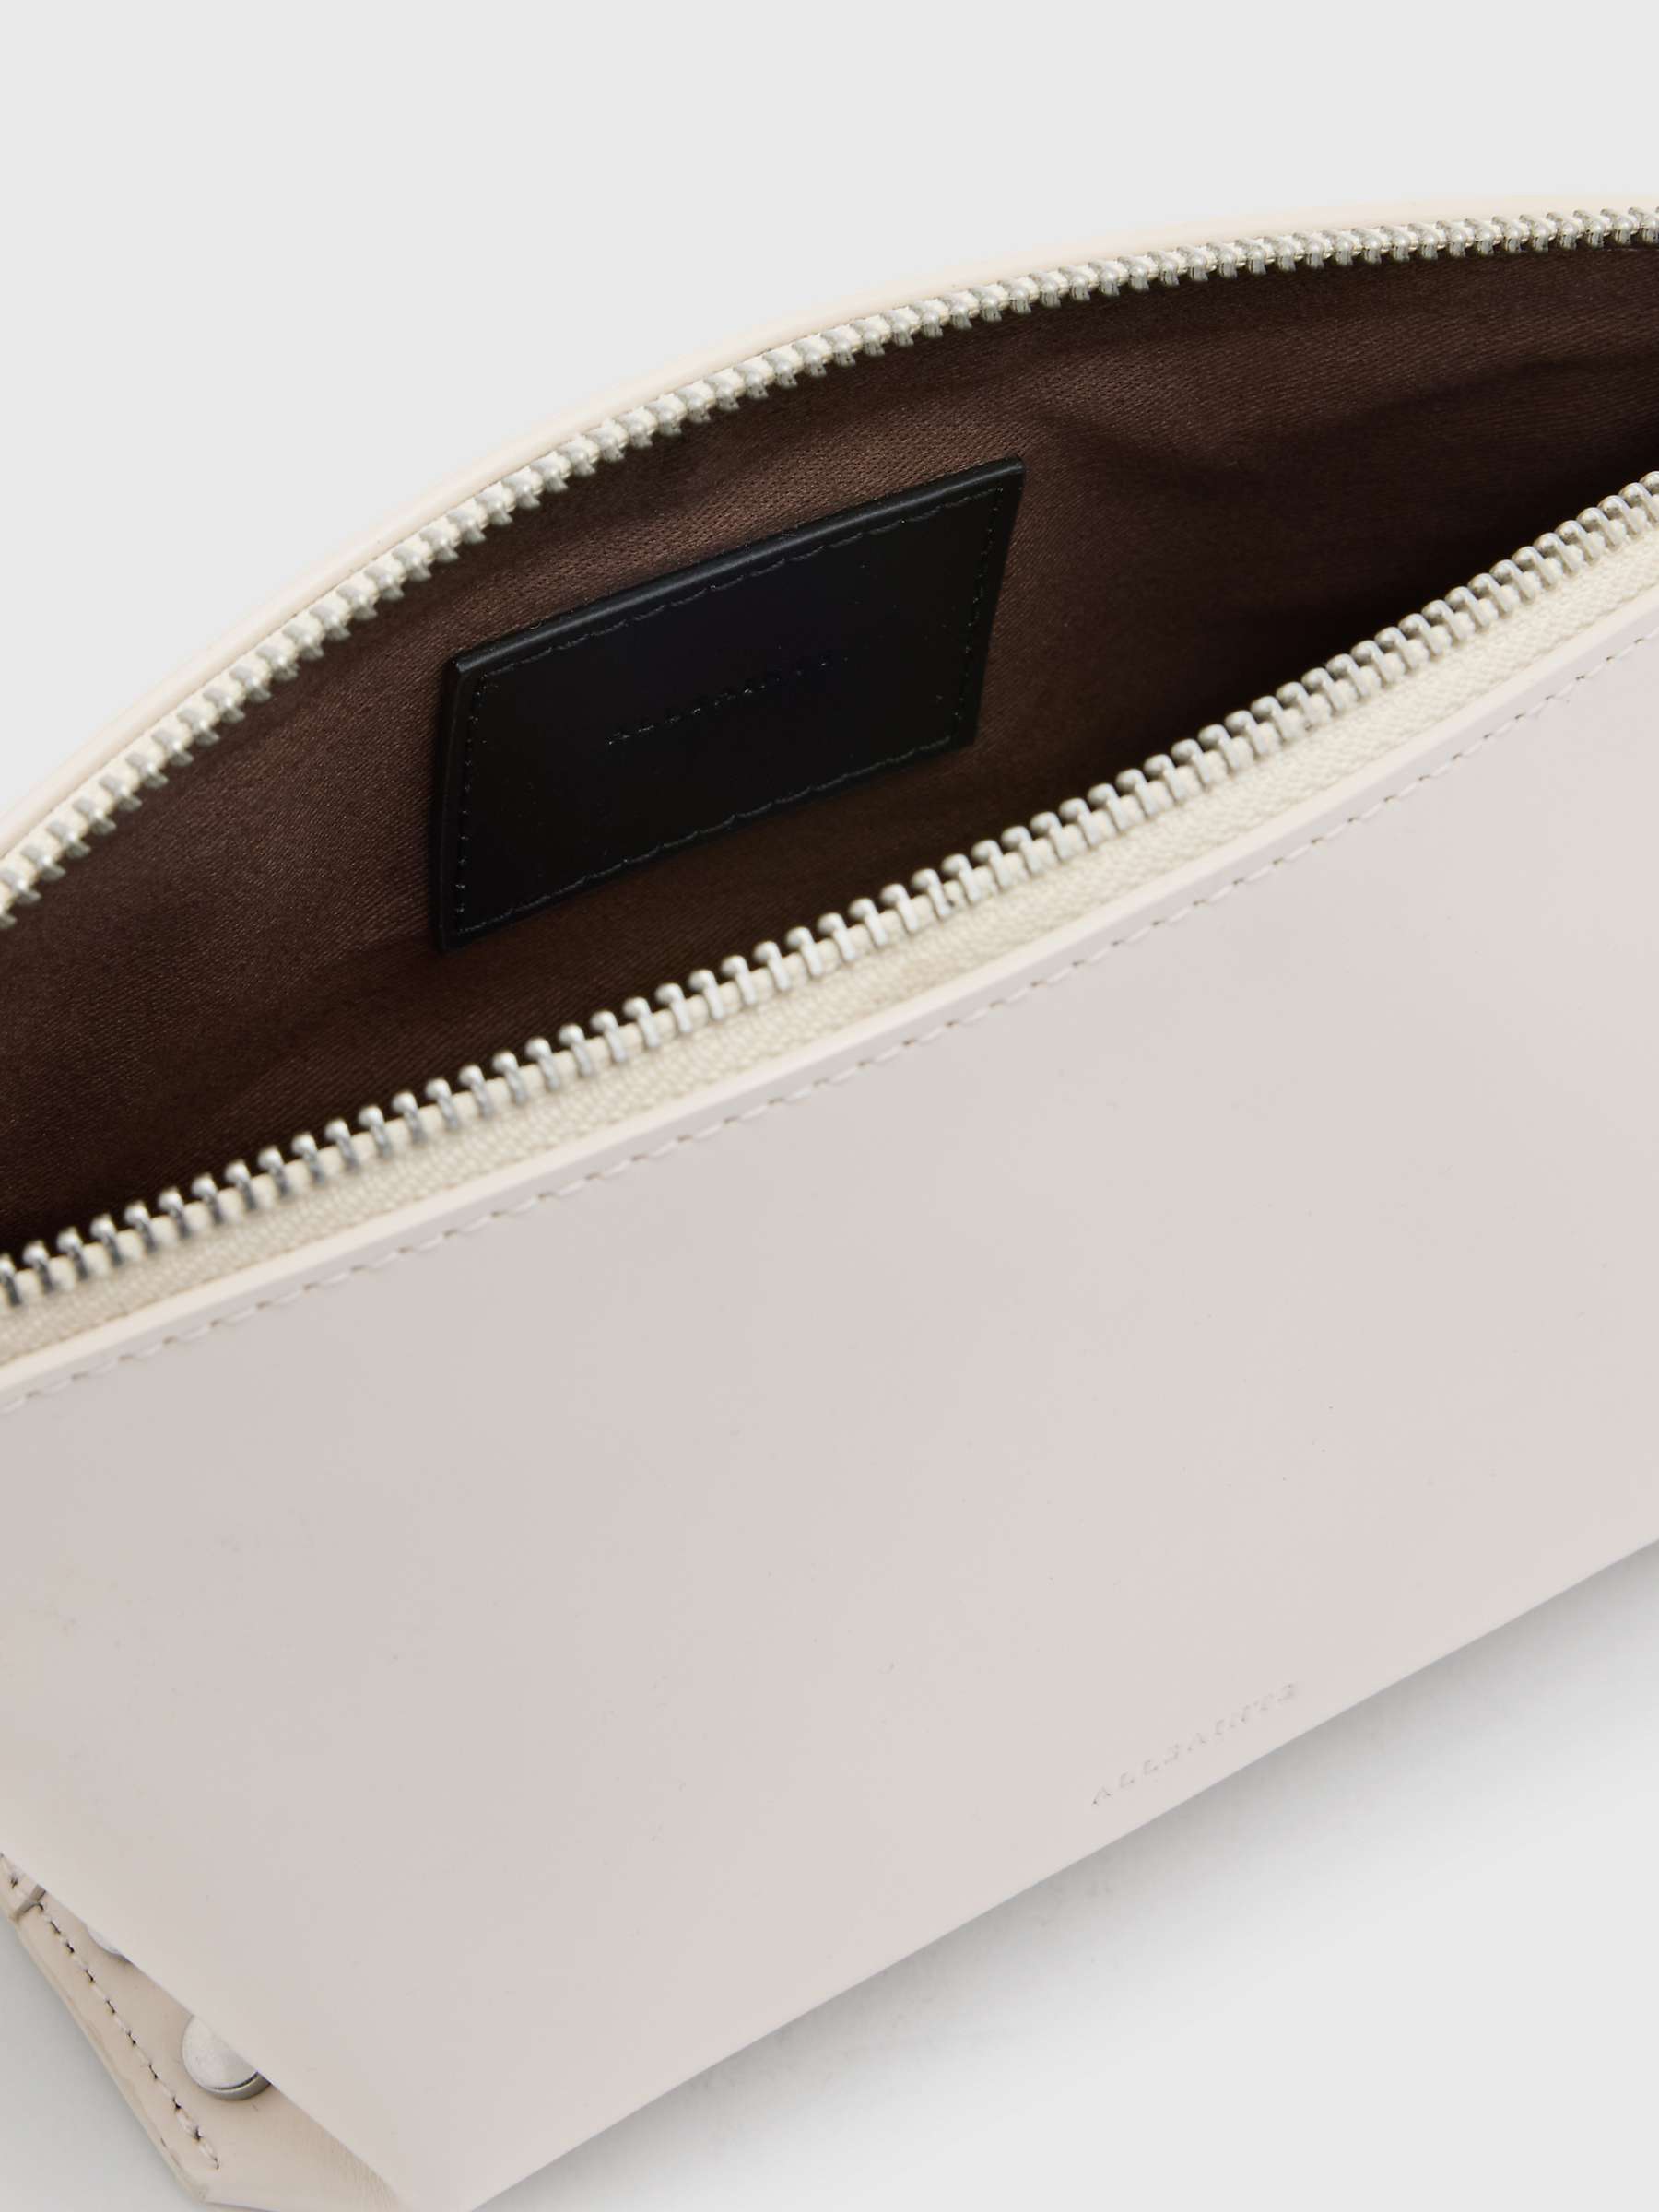 Buy AllSaints Anais Leather Pouch, Desert White Online at johnlewis.com